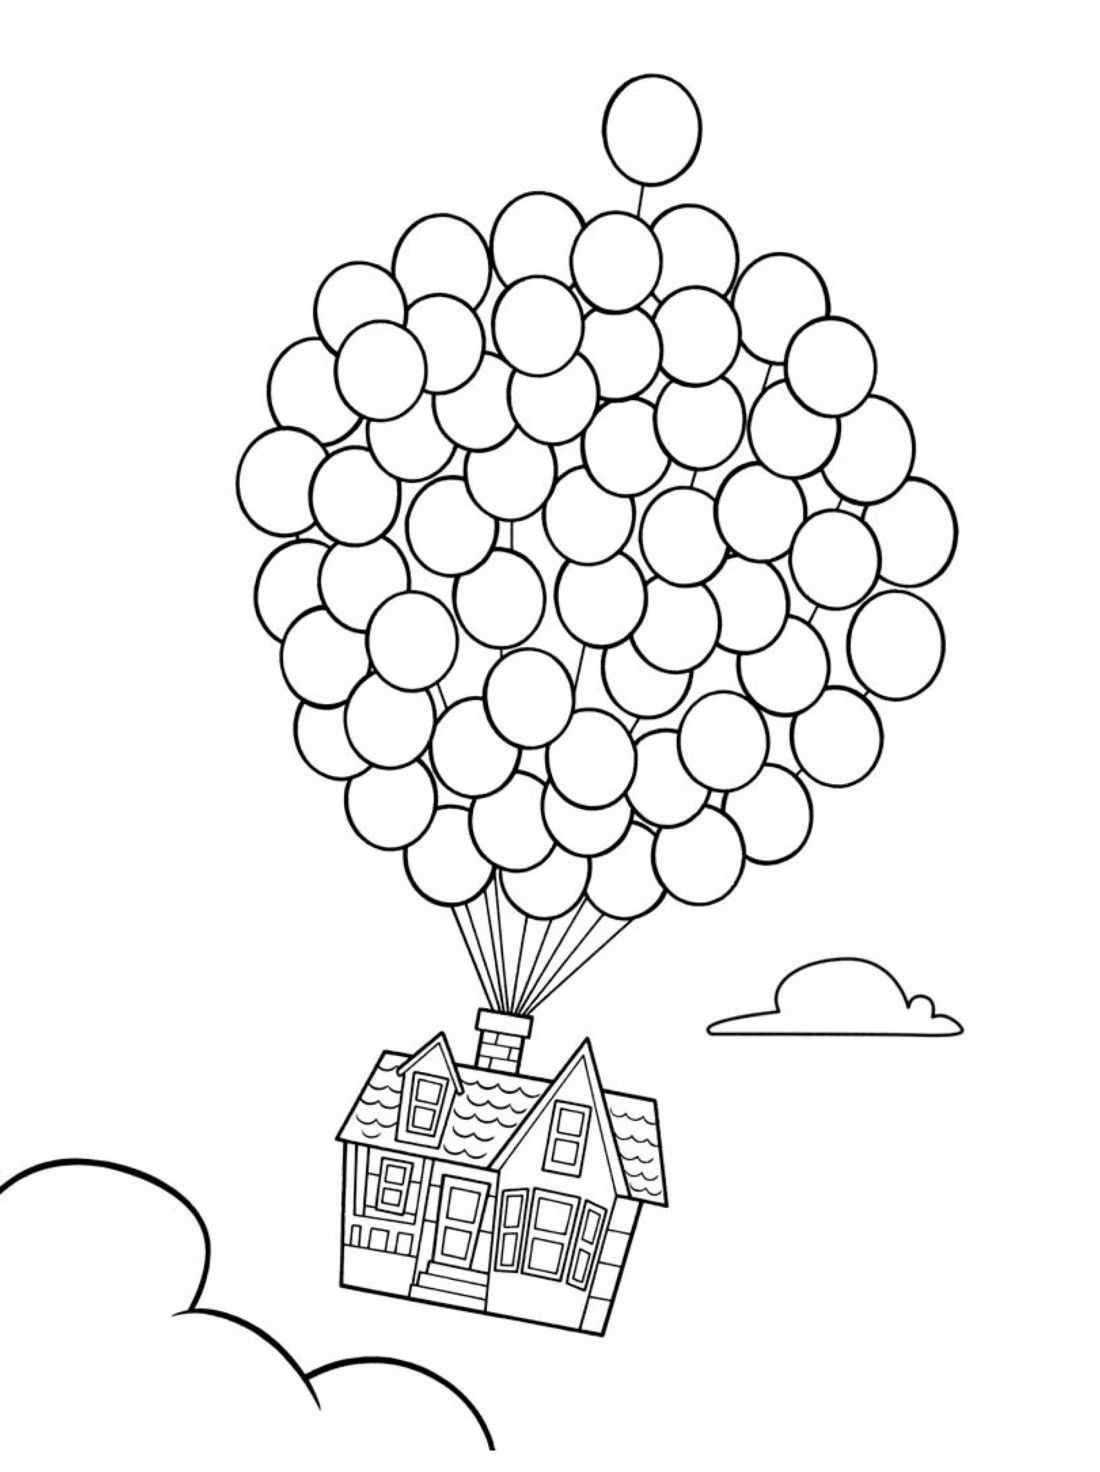 Up House and Balloons